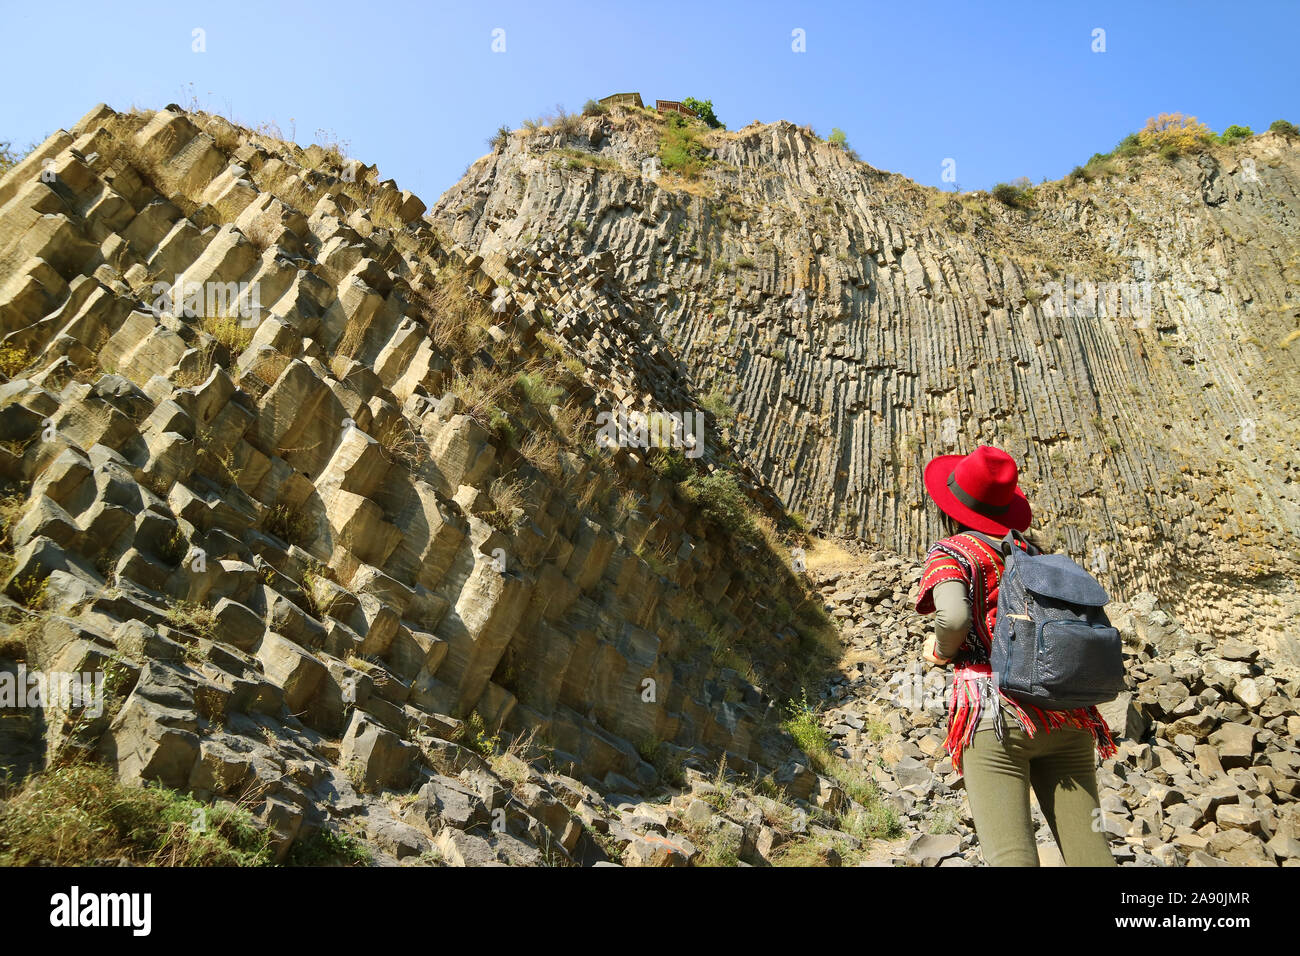 Woman Impressed by the Incredible Symphony of Stones Basalt Column Formations Along the Garni Gorge, Armenia Stock Photo